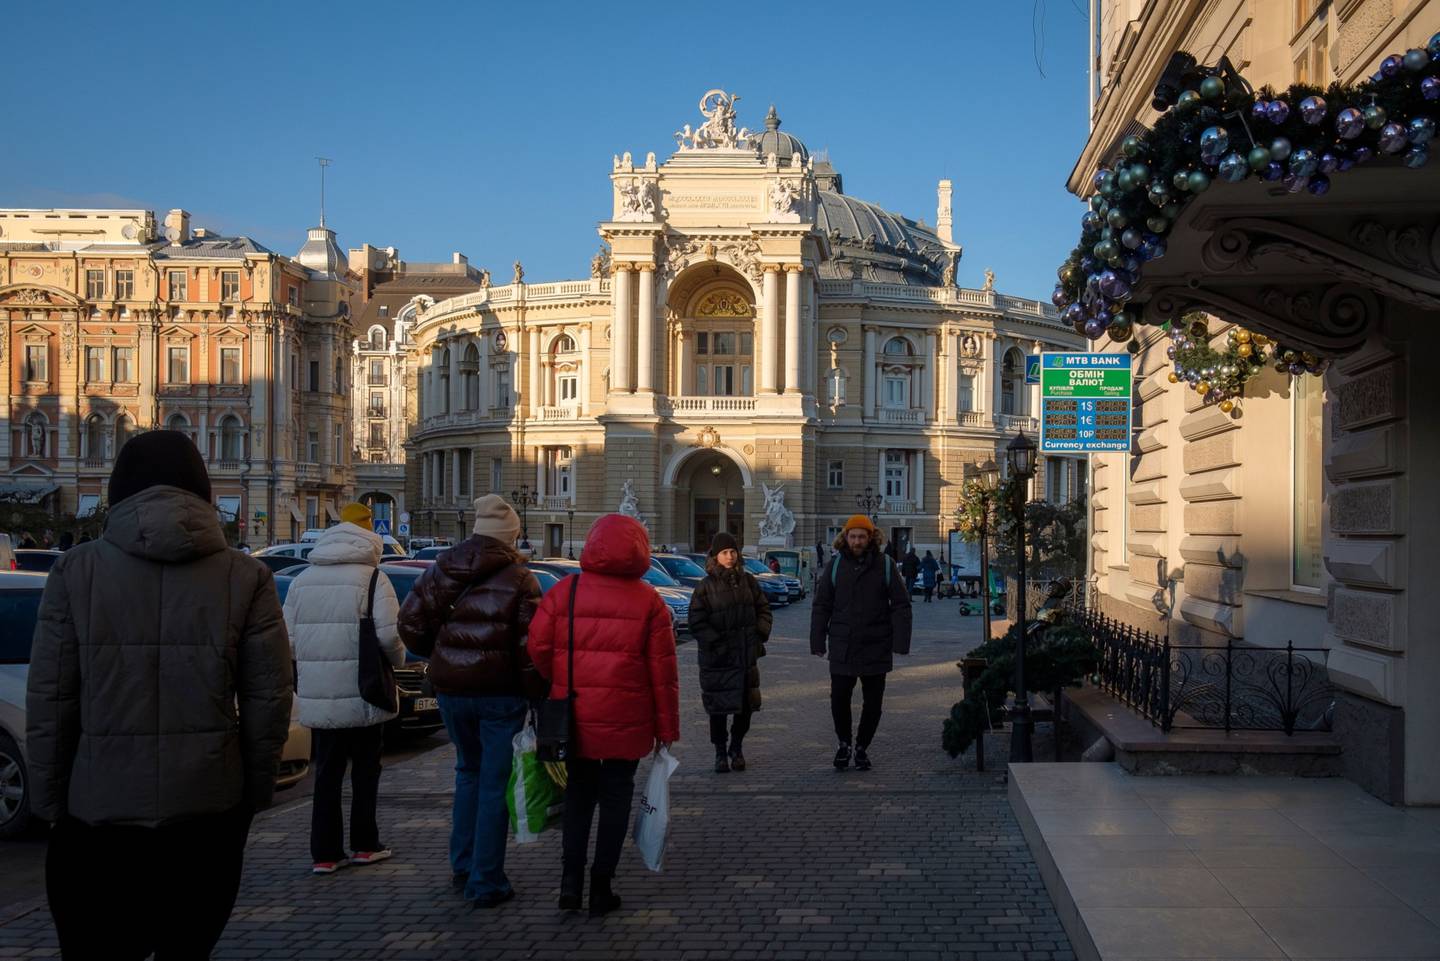 The historic center of Odessa on Jan. 22.dfd